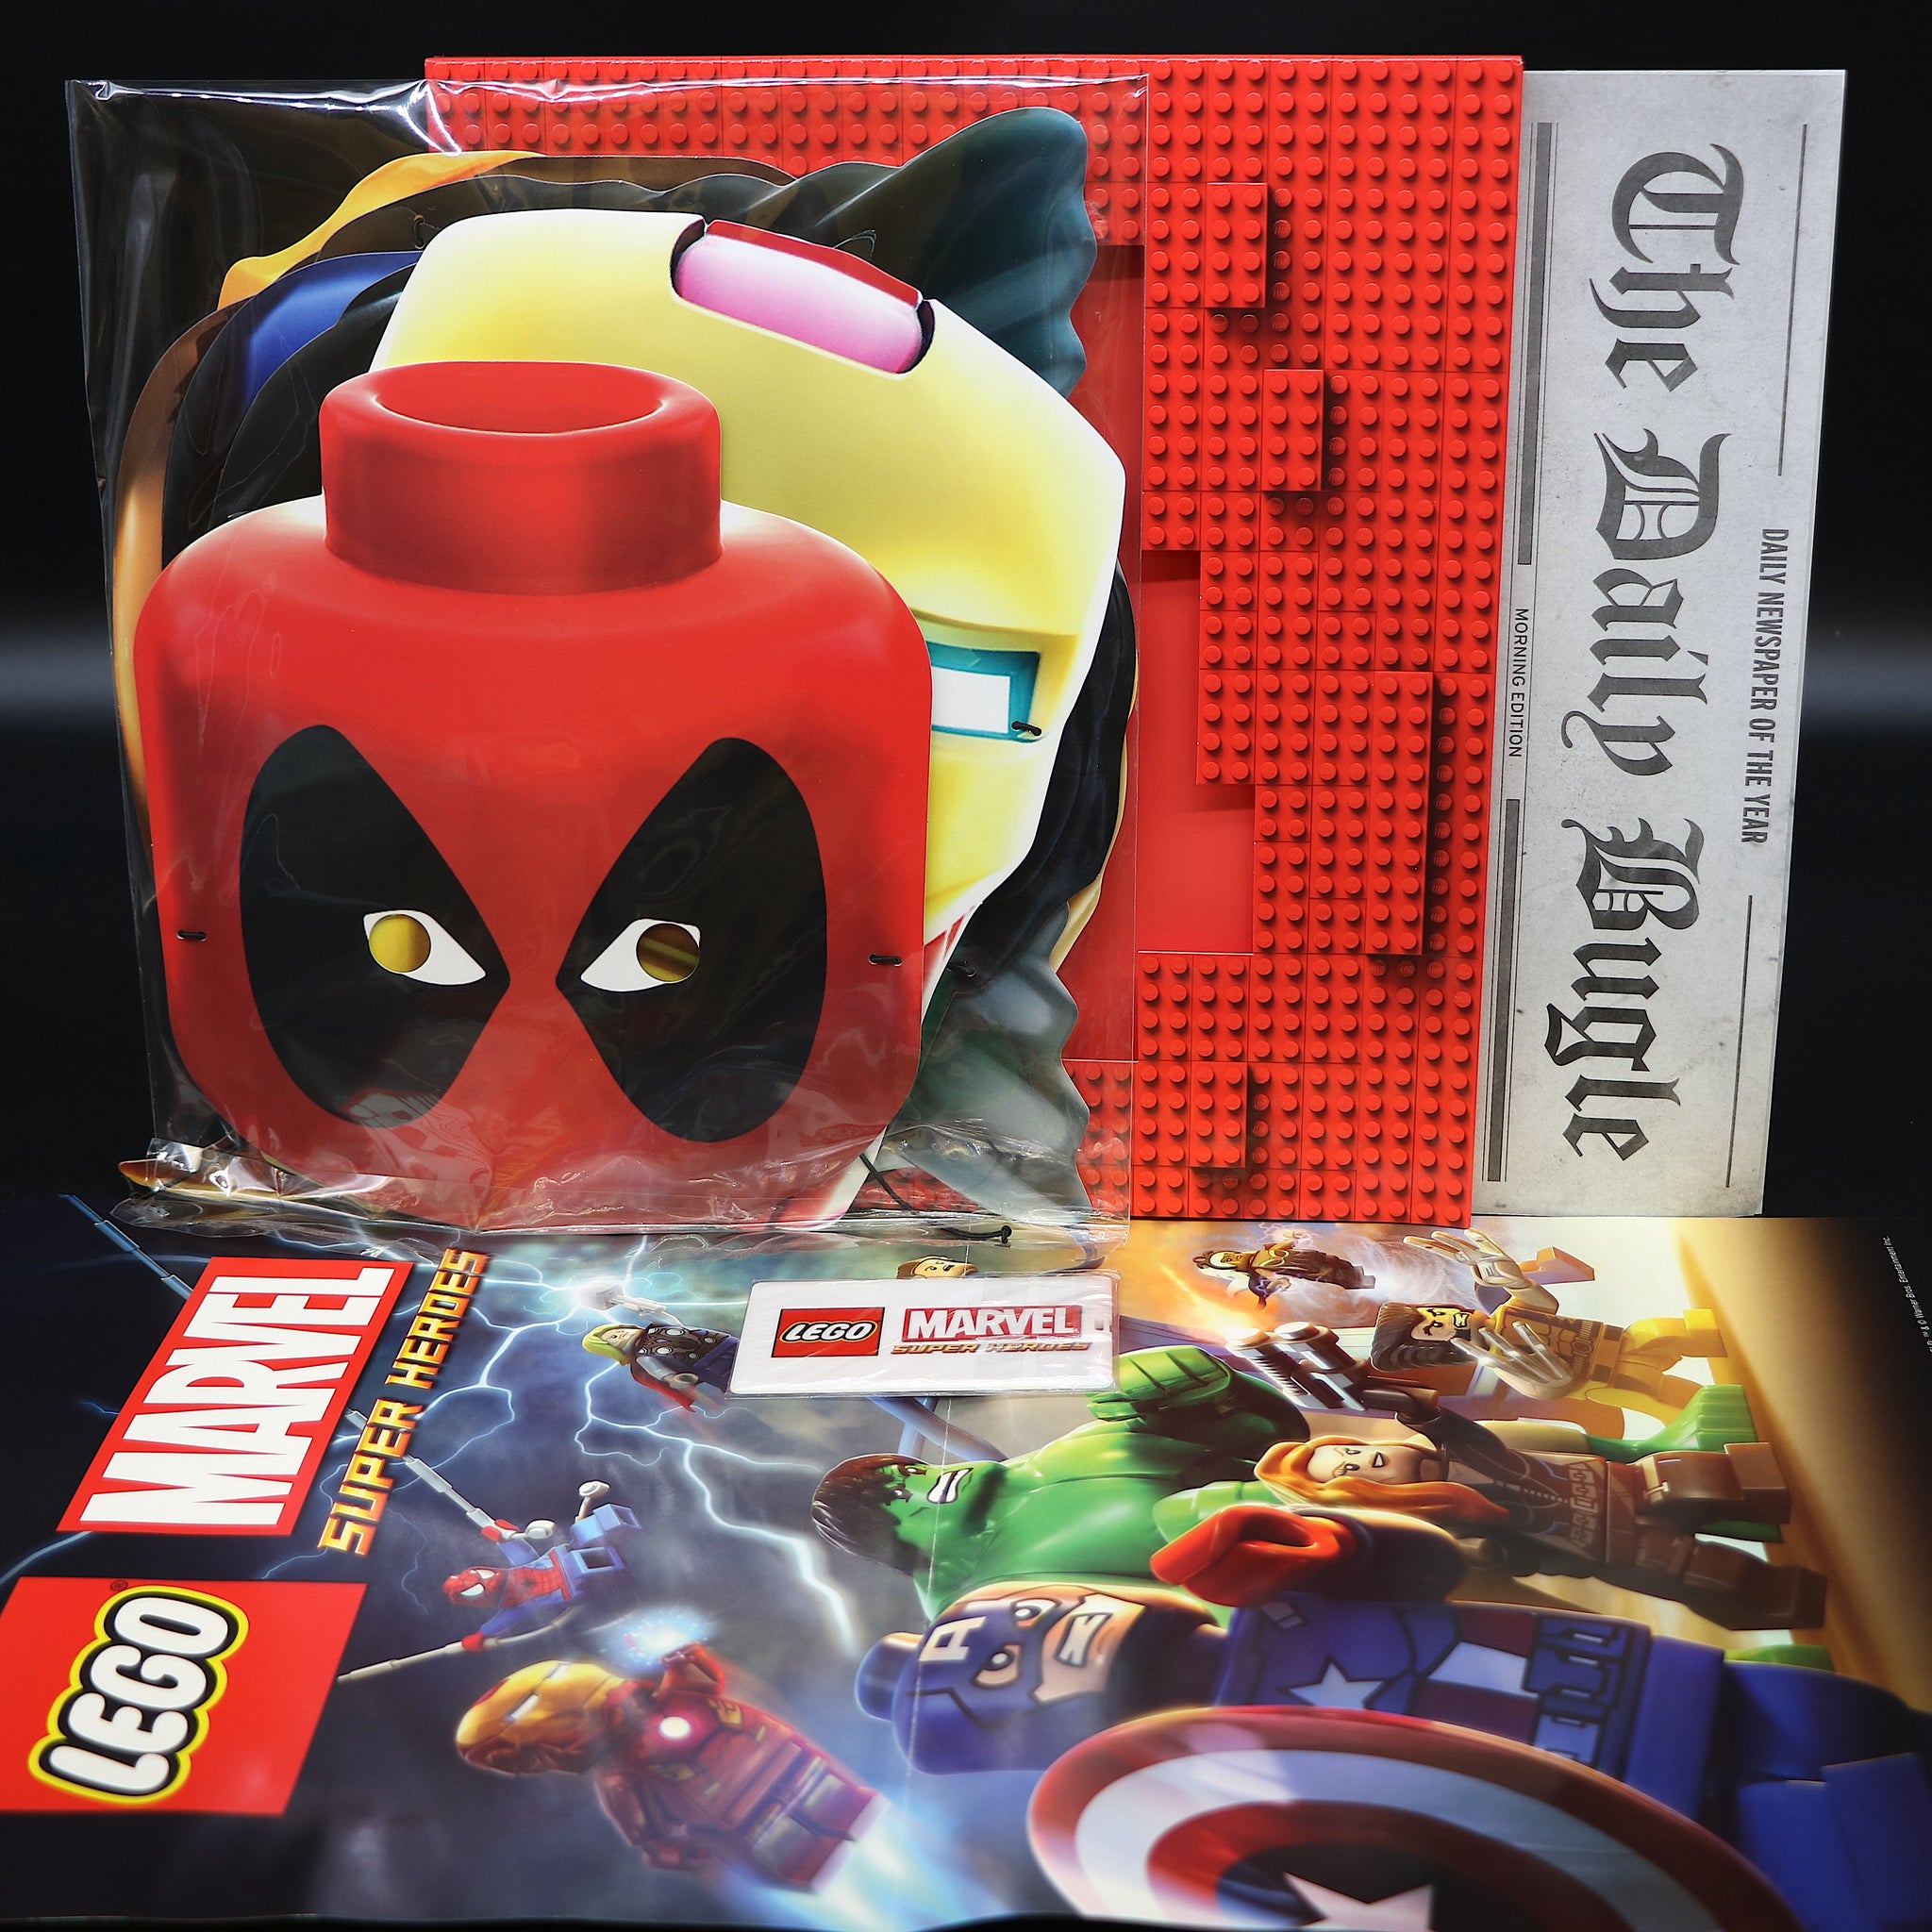 Lego Marvel Super Heroes | Sony PS3/PS4 Game | Rare Promo Press Kit